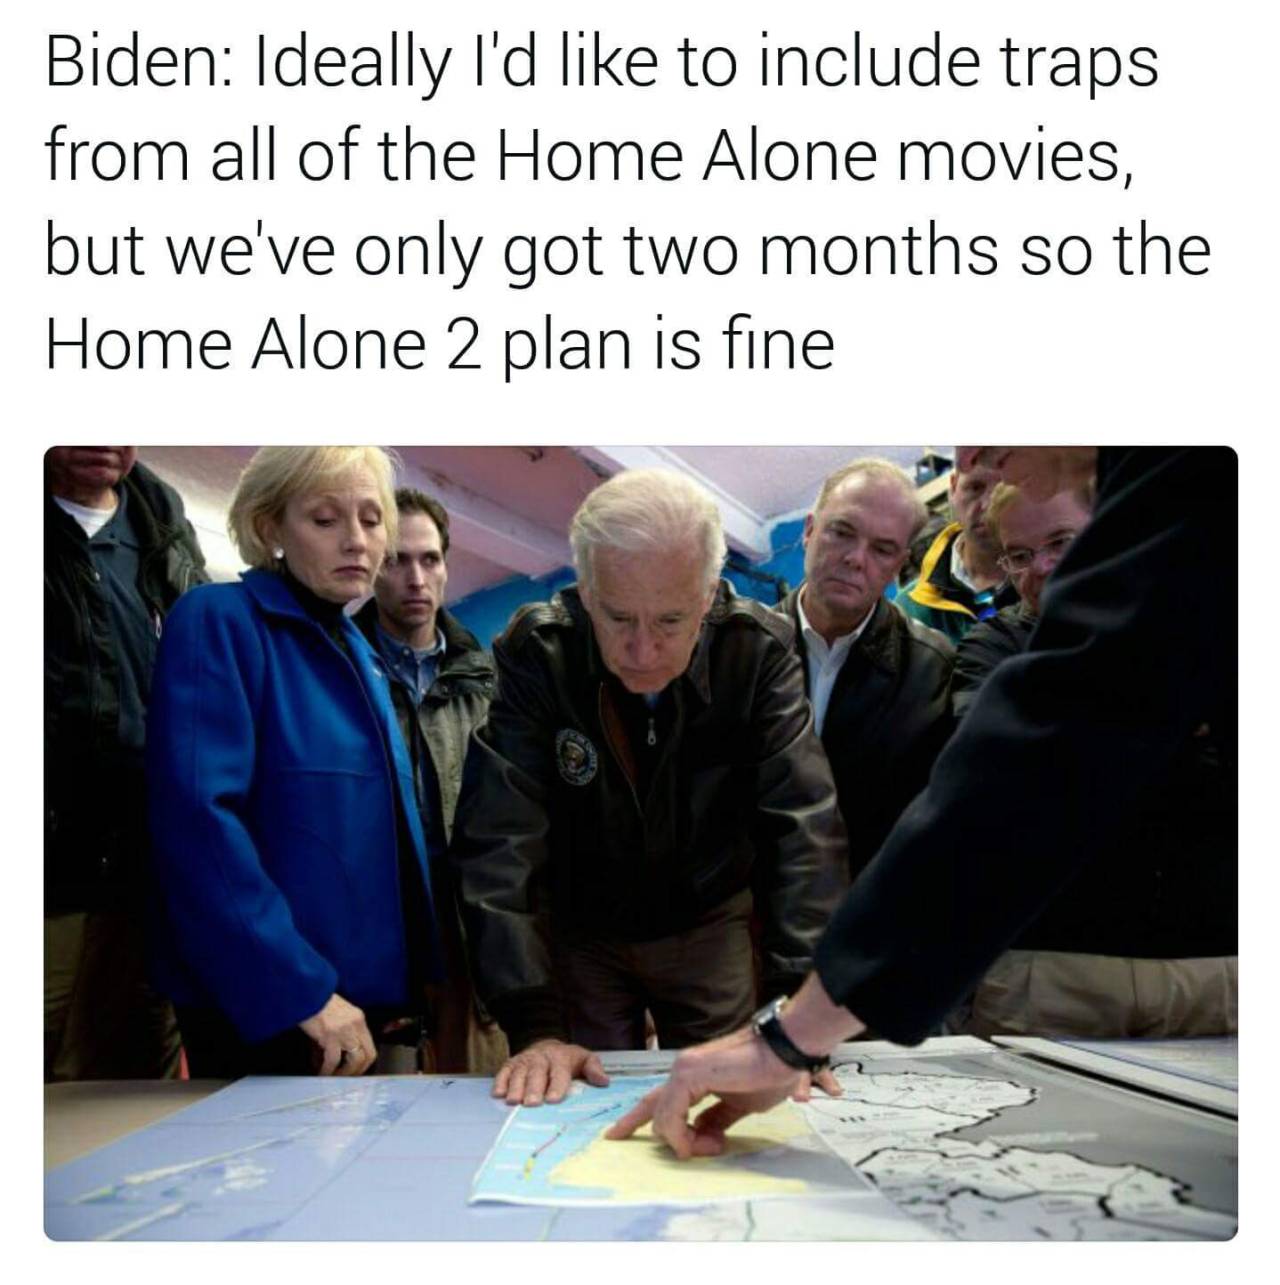 monday morning randomness - Joe Biden - Biden Ideally I'd to include traps from all of the Home Alone movies, but we've only got two months so the Home Alone 2 plan is fine